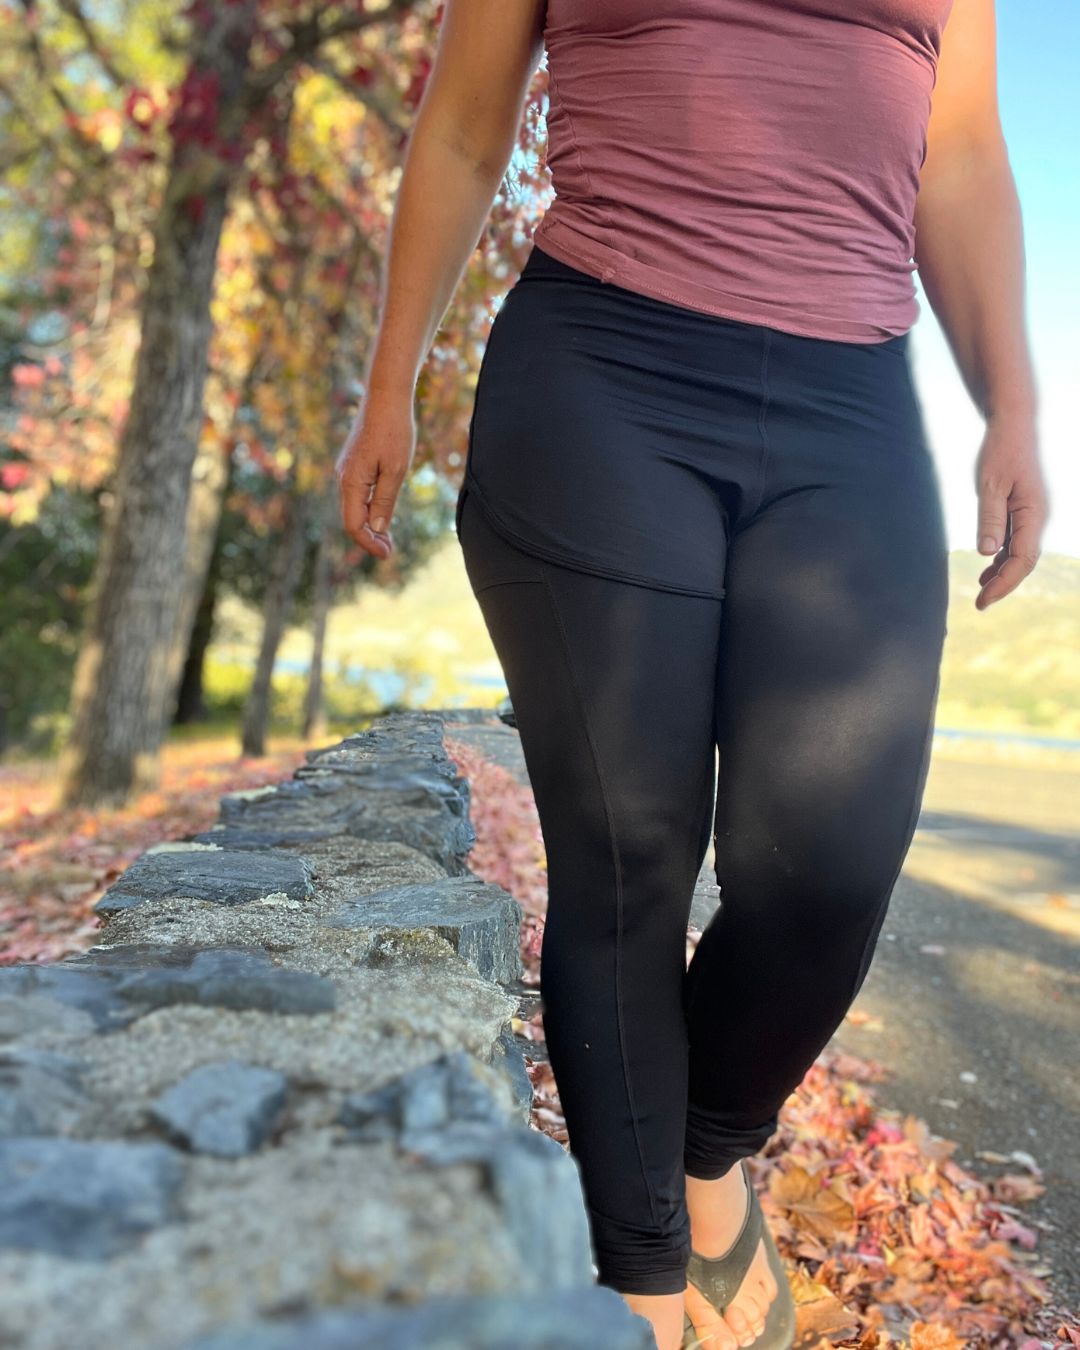 Find Recycled Nylon Spandex Yoga Pants,Recycled Nylon Spandex Yoga